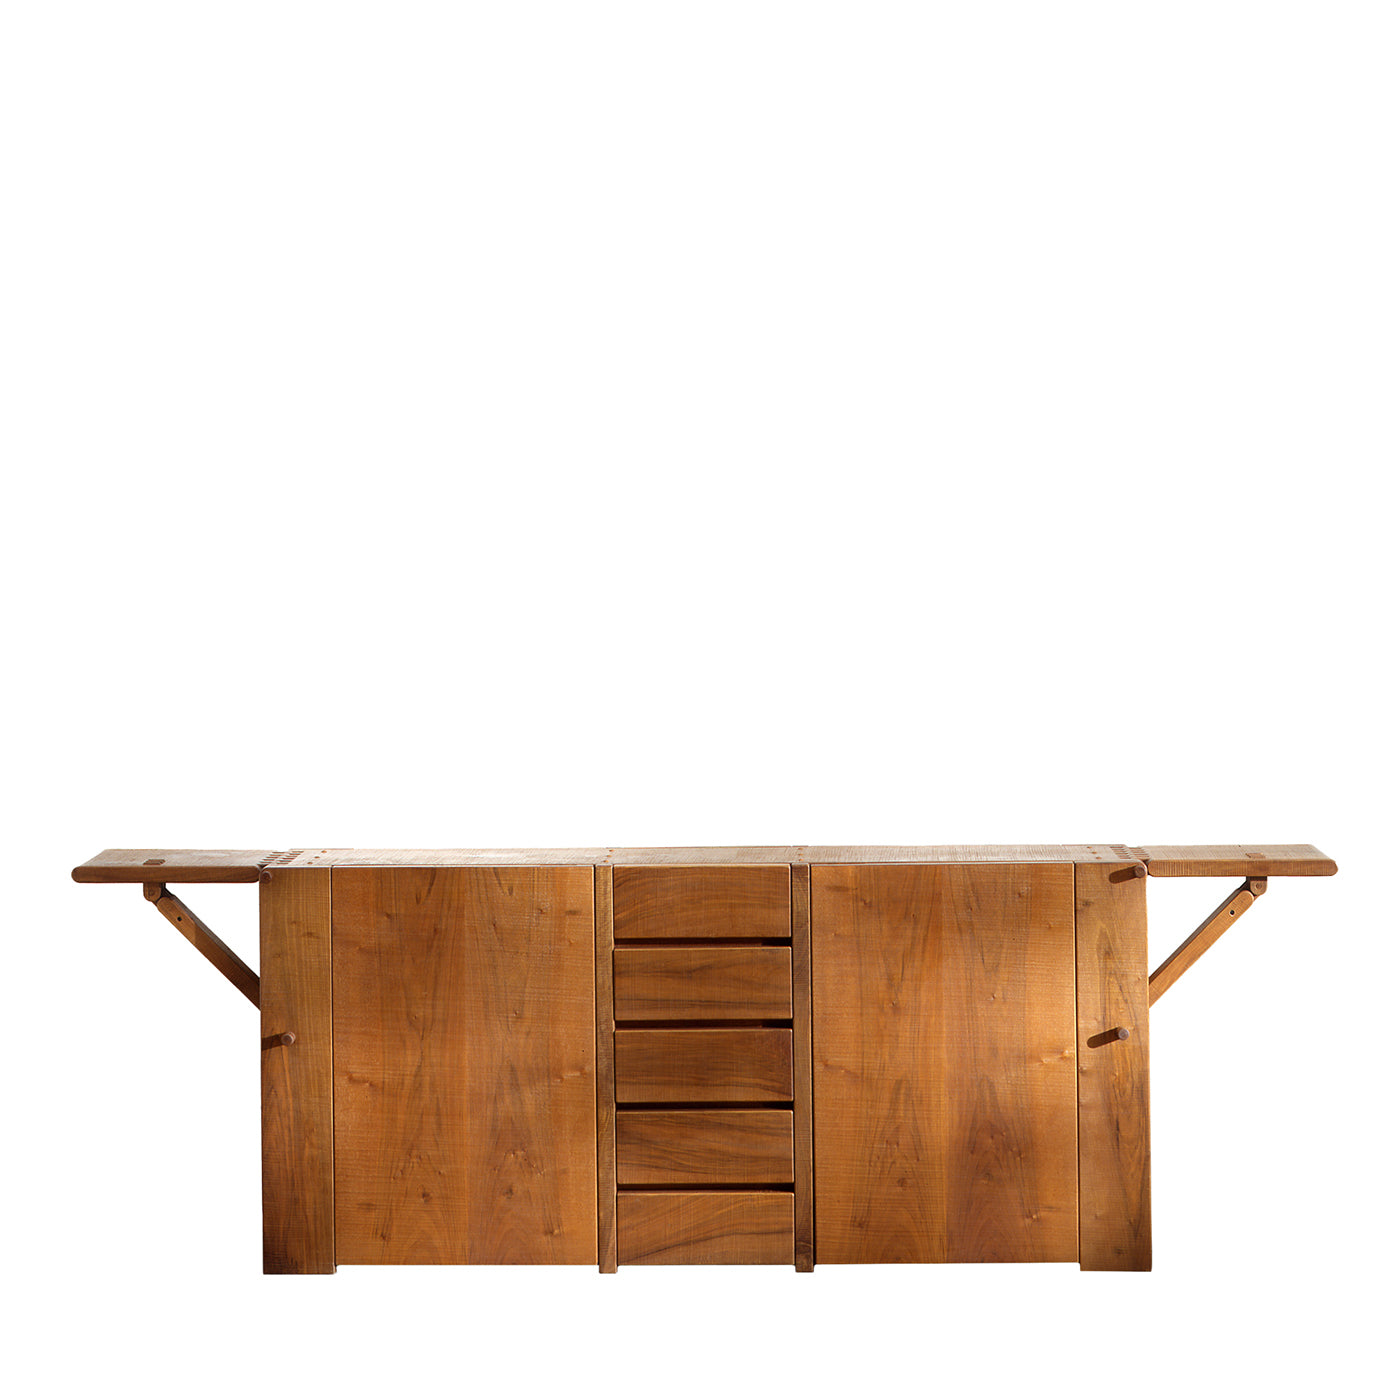 Del Transetto 2-Door Walnut Sideboard with Drawers - Main view